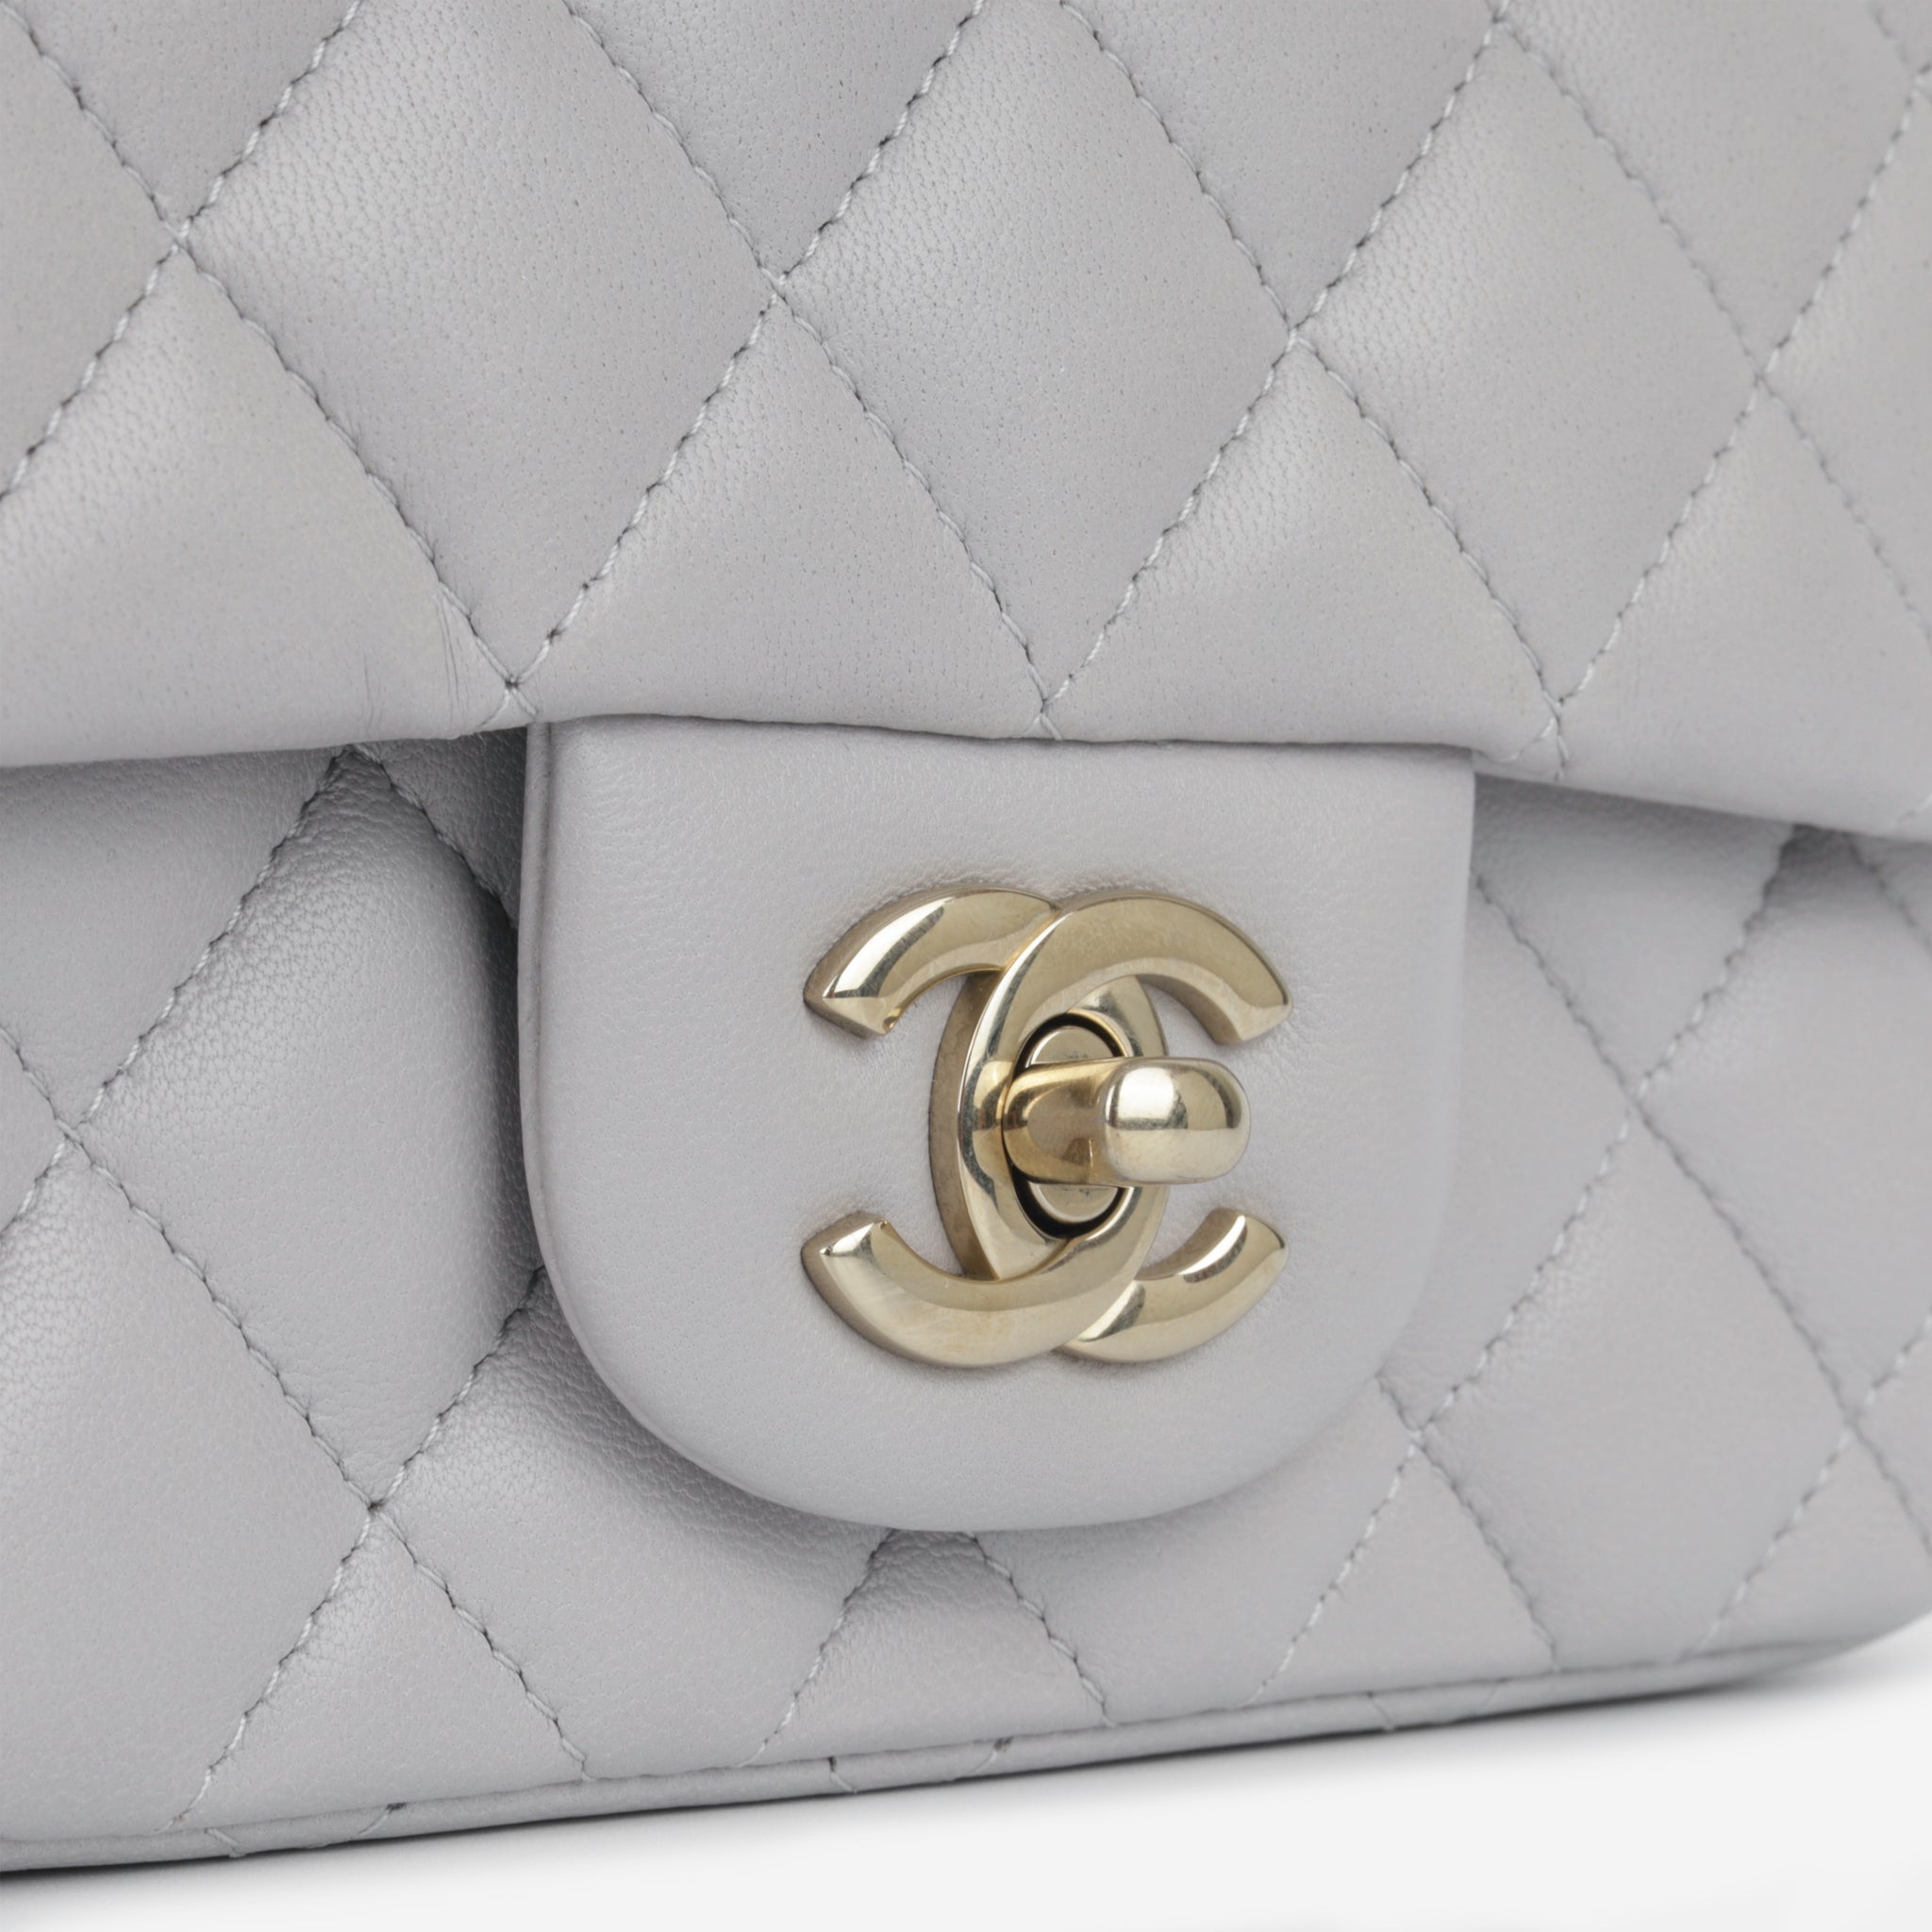 Chanel - Mini Square Classic Flap Bag - Grey Lambskin - CGHW - Excellent